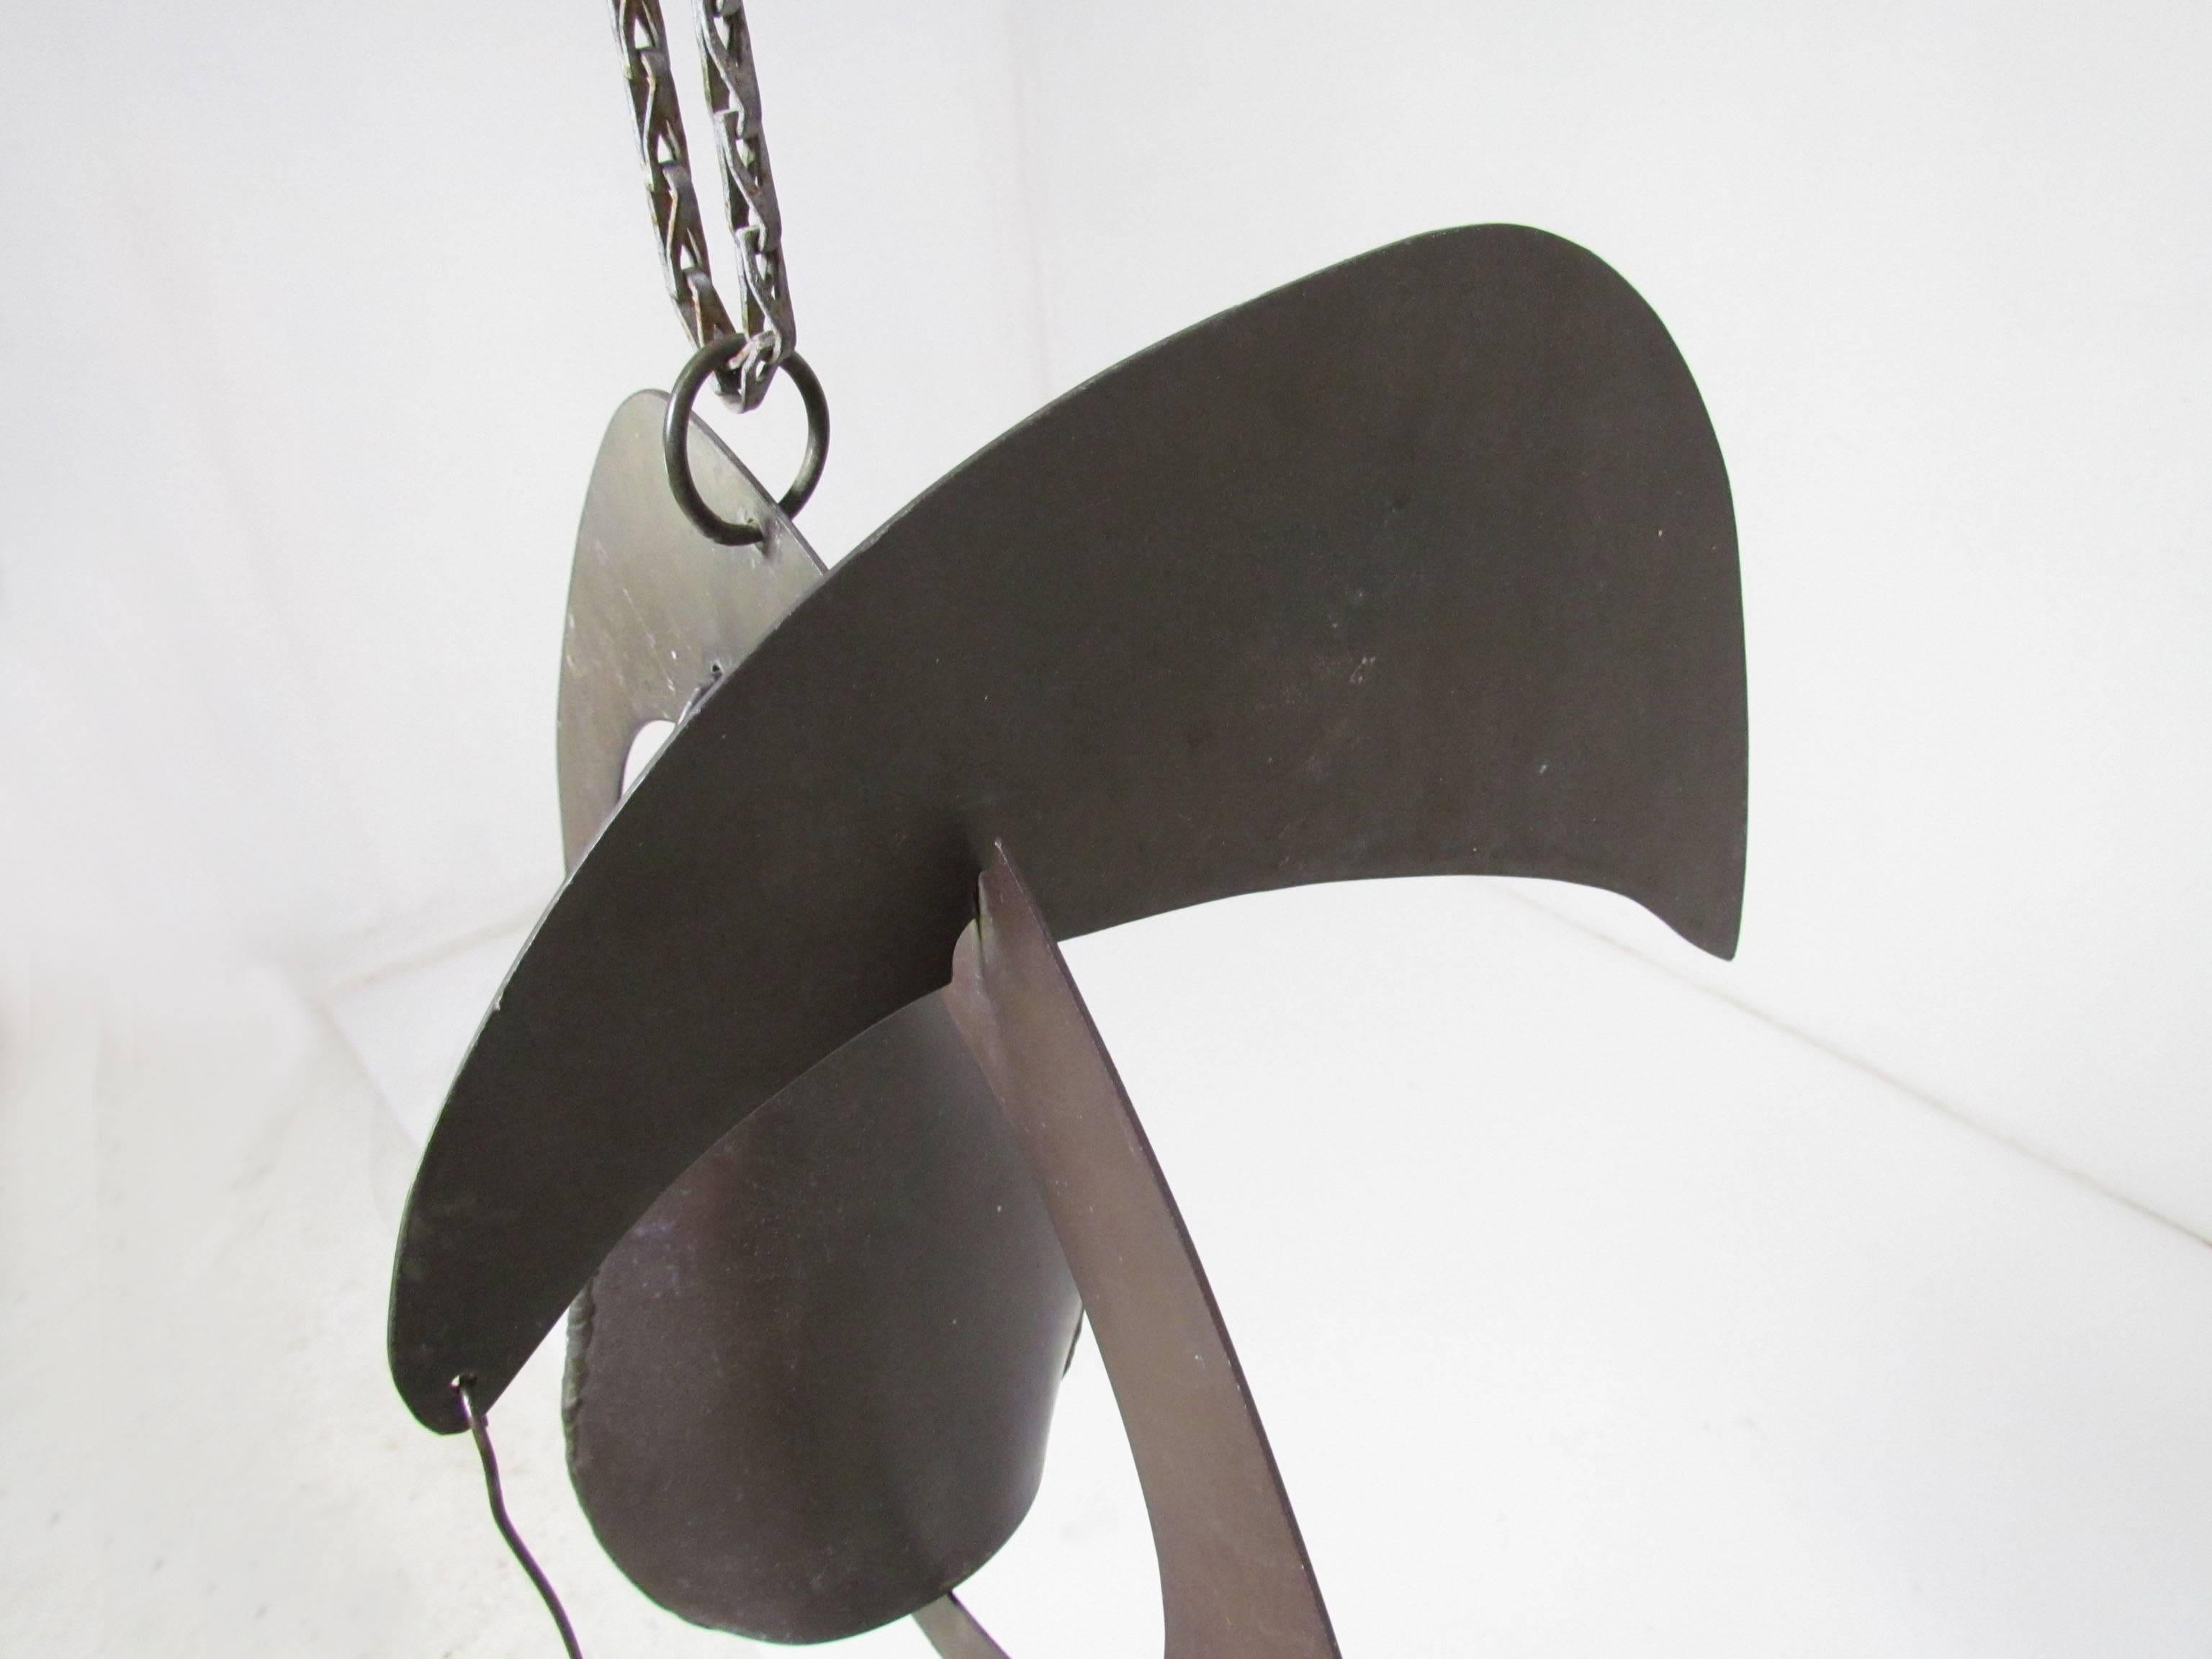 American Handmade Hanging Abstract Sculpture, Kinetic Wind Chime/Bell, circa 1970s